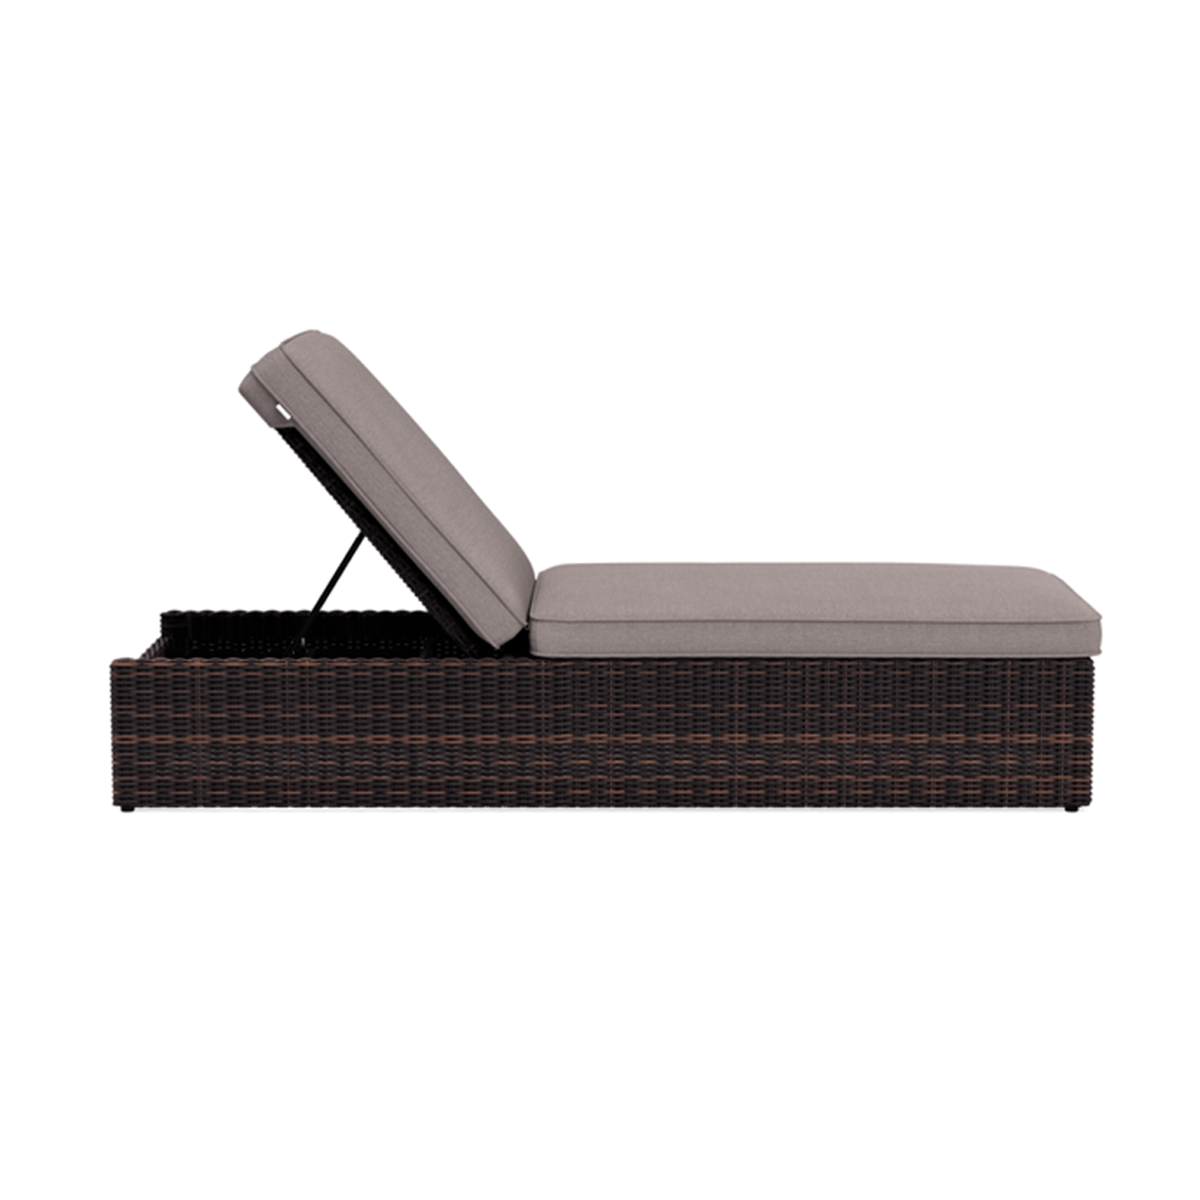 Langdon/Waverly Outdoor Chaise Lounge